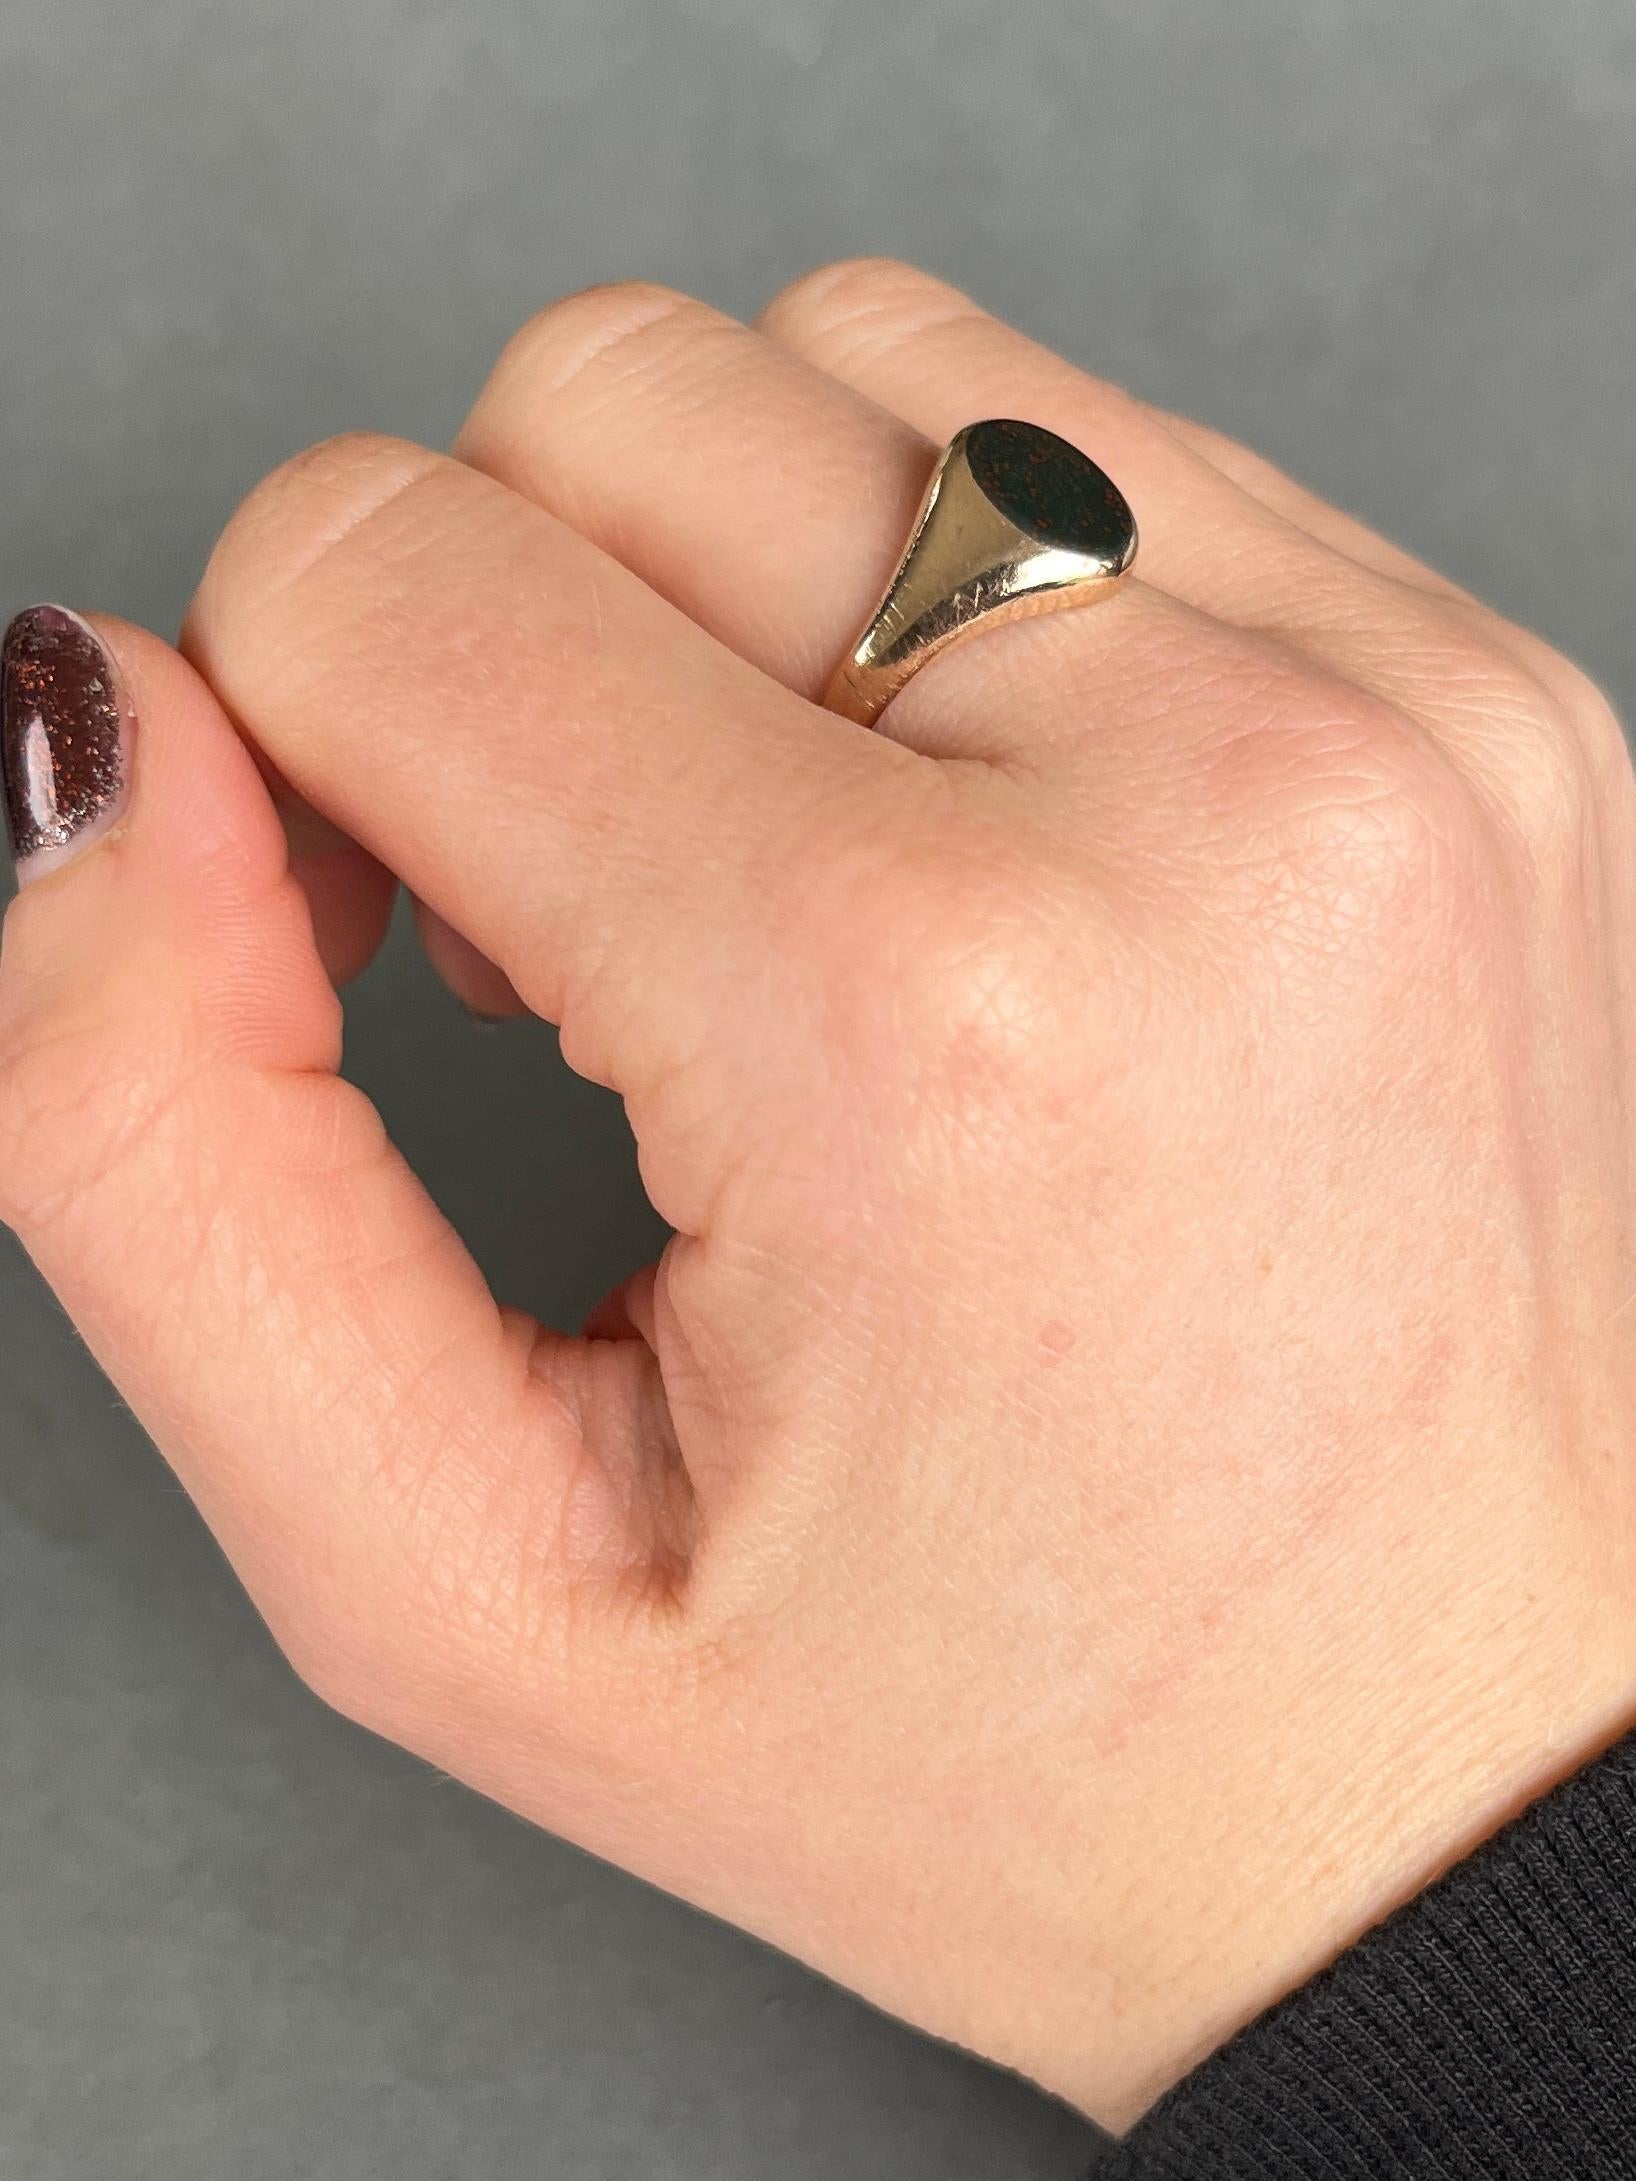 This gorgeous signet ring has a bloodstone set within the 9carat gold band. The stone is deep green with flecks of red running through. Fully hallmarked London 1968.

Ring Size: N or 6 3/4
Stone dimensions: 10x8mm 

Weight: 3.4g 